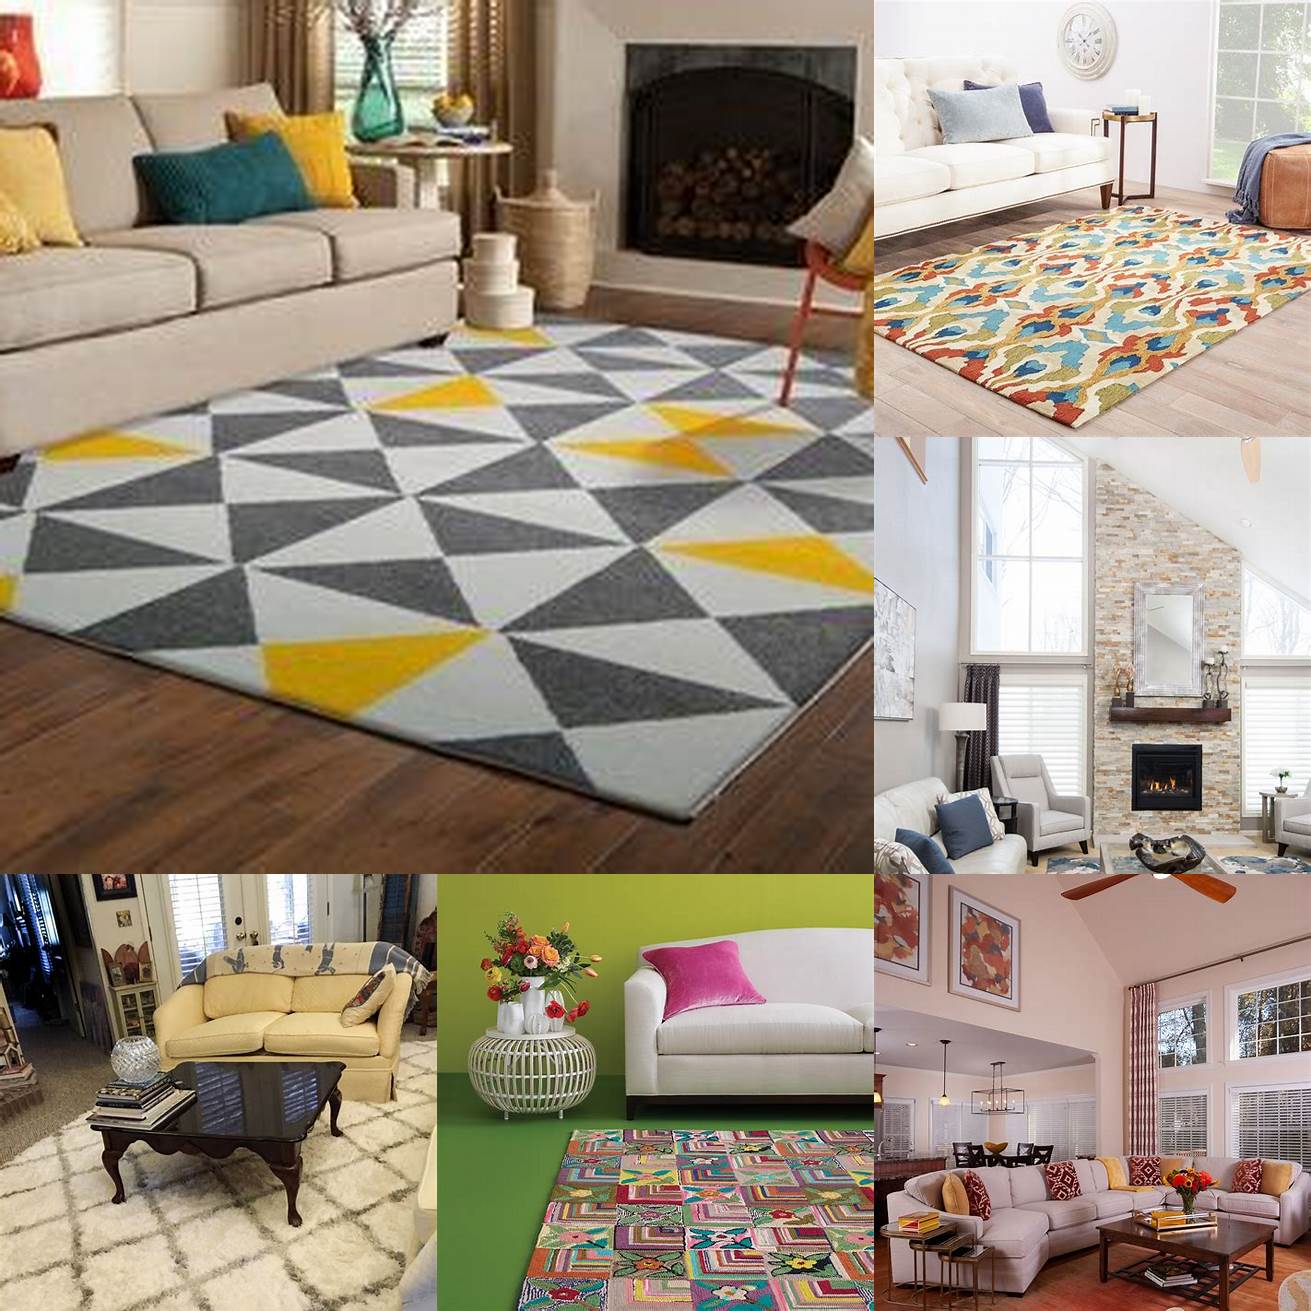 Use a rug as a focal point in a room